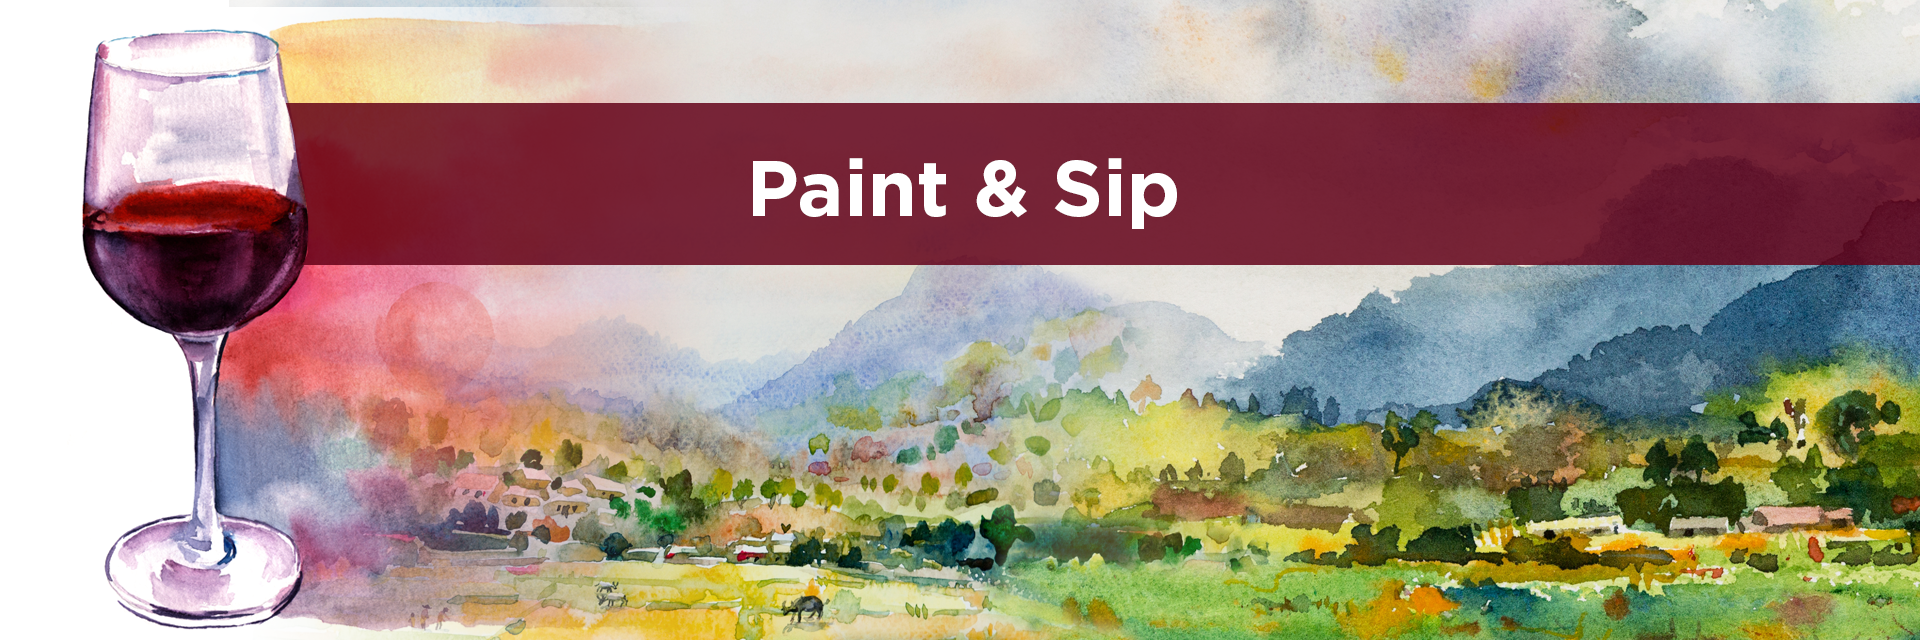 Paint & Sip: Art Event at Cosley Zoo